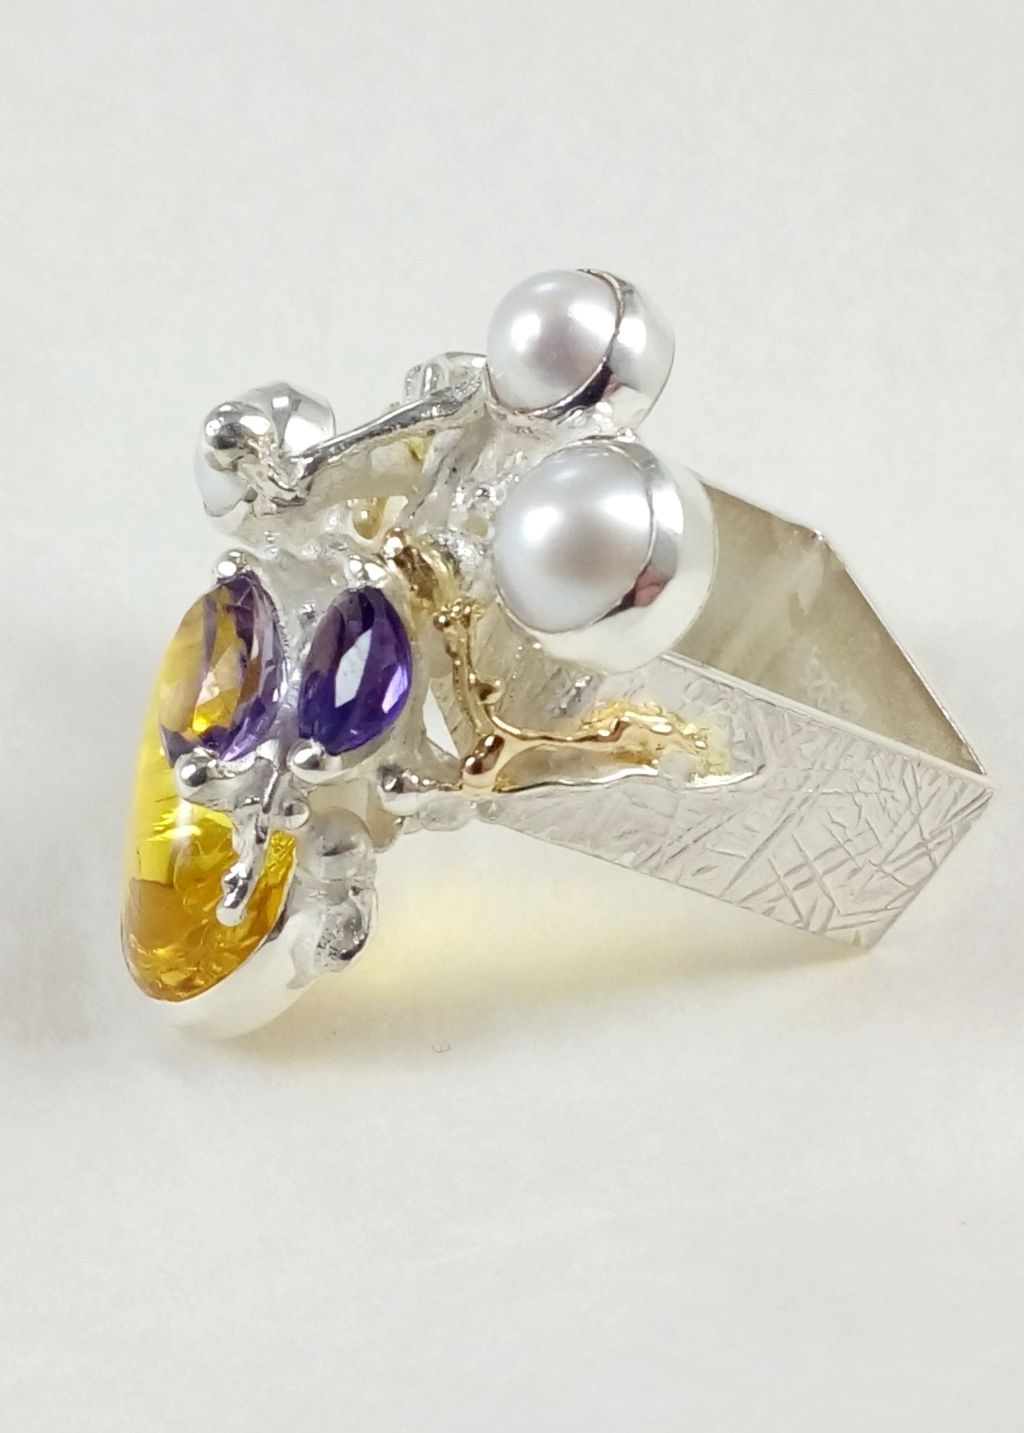 jewelry made from gold and silver, jewelry with color stones, jewelry with real pearls, gregory pyra piro square ring #5631, sculptural jewellery with ocean theme, antique motif inspired ring, sterling silver and 14k gold artisan jewellery, auction house with contemporary jewellery, color gemstone jewelry made by artistjewelry with detailed design, how to bid on auctions with collectibles and fine jewellery, shop for fine craft and collectibles, galleries with handcrafted jewellery for mature womens, antique style handcrafted jewellery, if you like antique jewellery you will like Gregory Pyra Piro art jewellery, jewelry with detailed design, real natural pearls and semi precious stone jewellery, fine jewellery with gemstones for auctions, silver and gold jewellery for auctions, fine contemporary jewellery collectible, jewellery collectibles for auctions, handcrafted collectibles, handcrafted collectibles, rings for women with two amethysts and pearl, jewellery with amber and amethysts, fine craft gallery handcrafted ring for sale, sterling silver and 14 karat gold ring